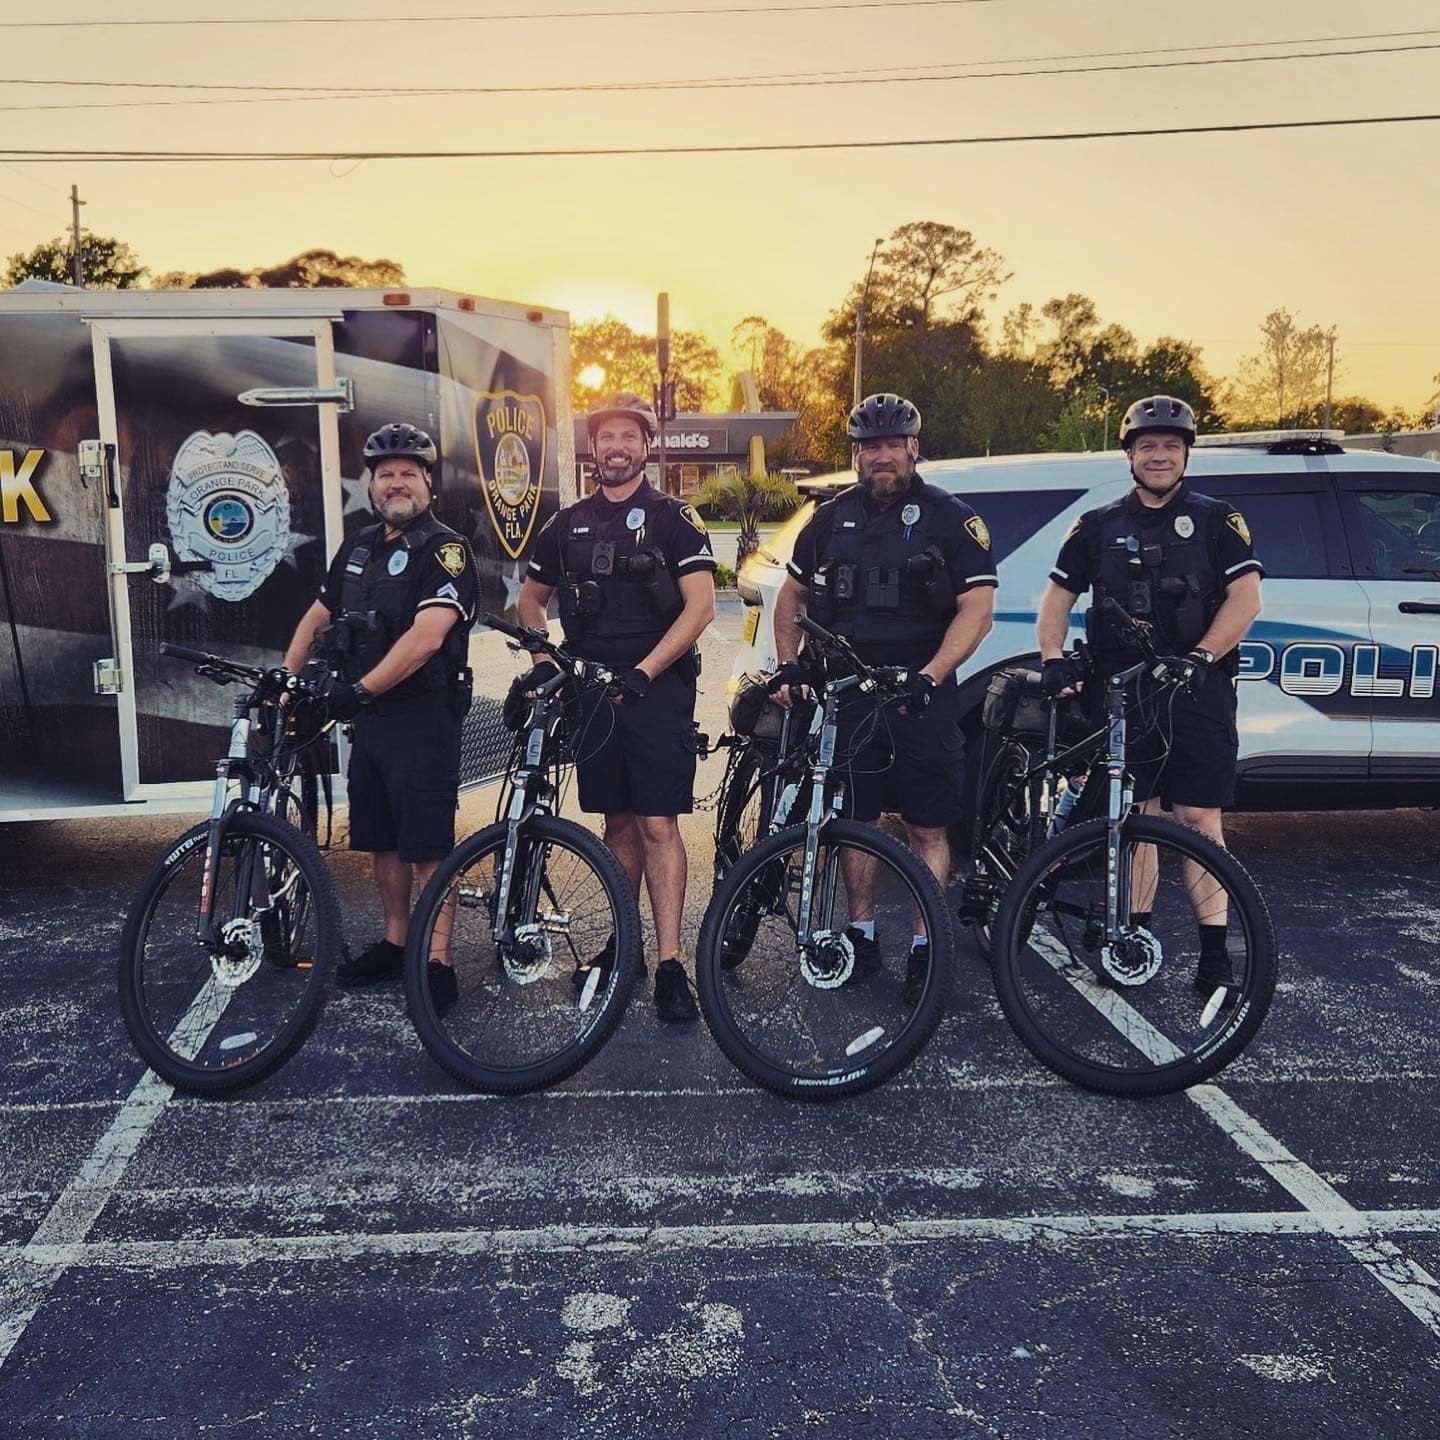 4 officers on bicycles